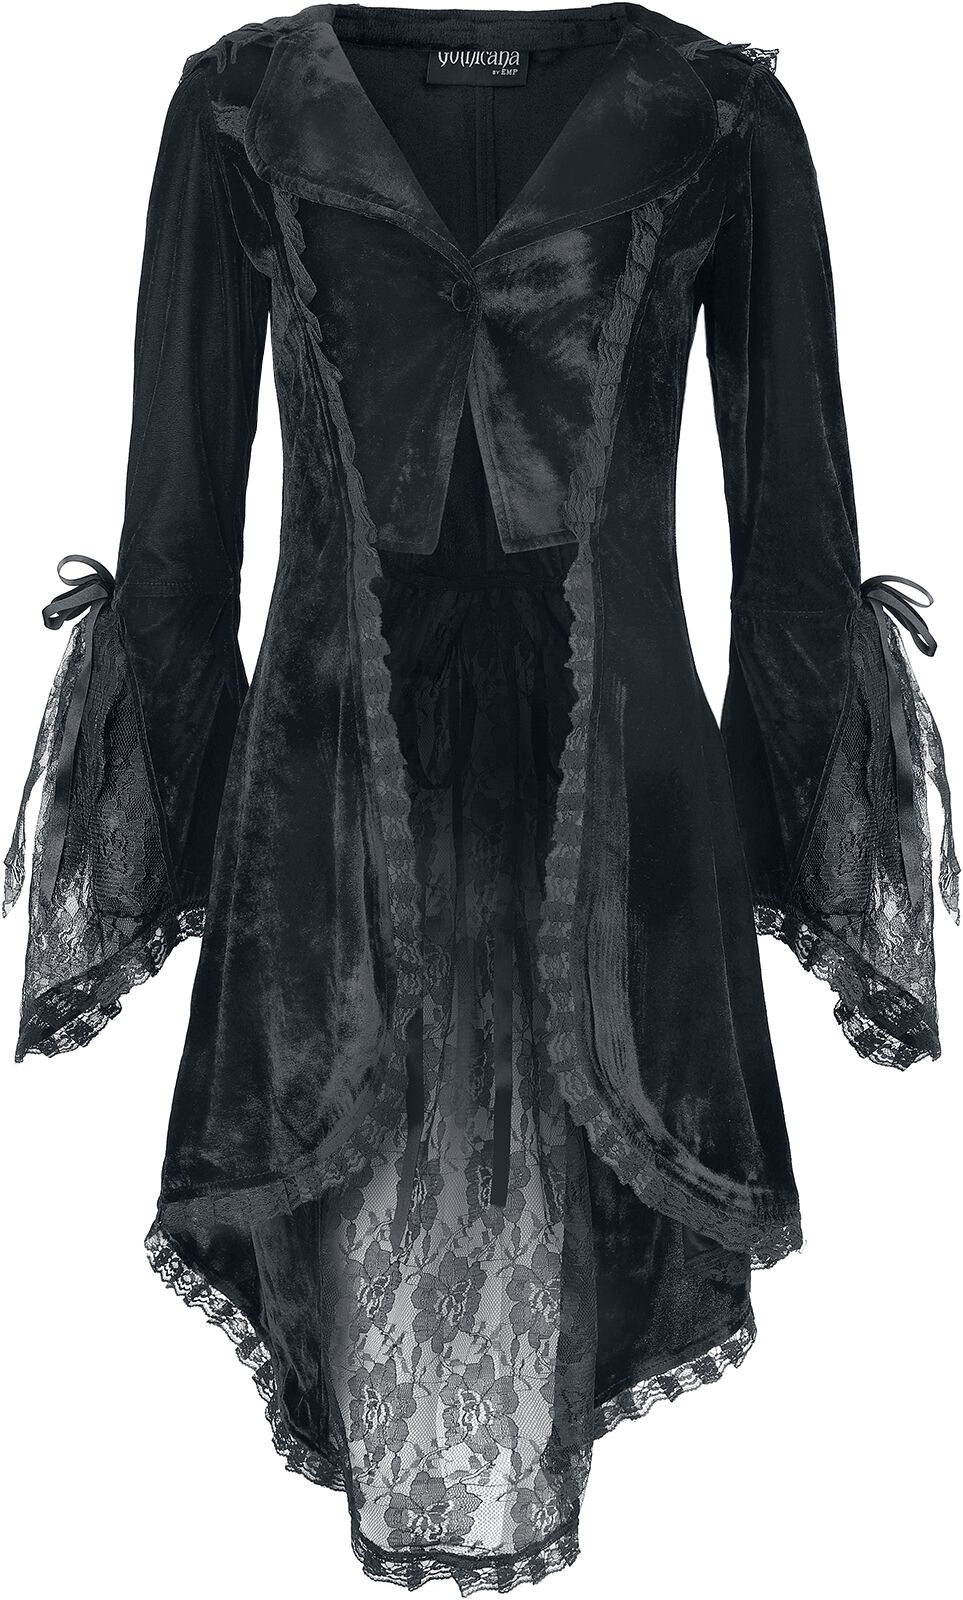 Image of Cardigan Gothic di Gothicana by EMP - Velvet cardigan with lace details - M a XL - Donna - nero